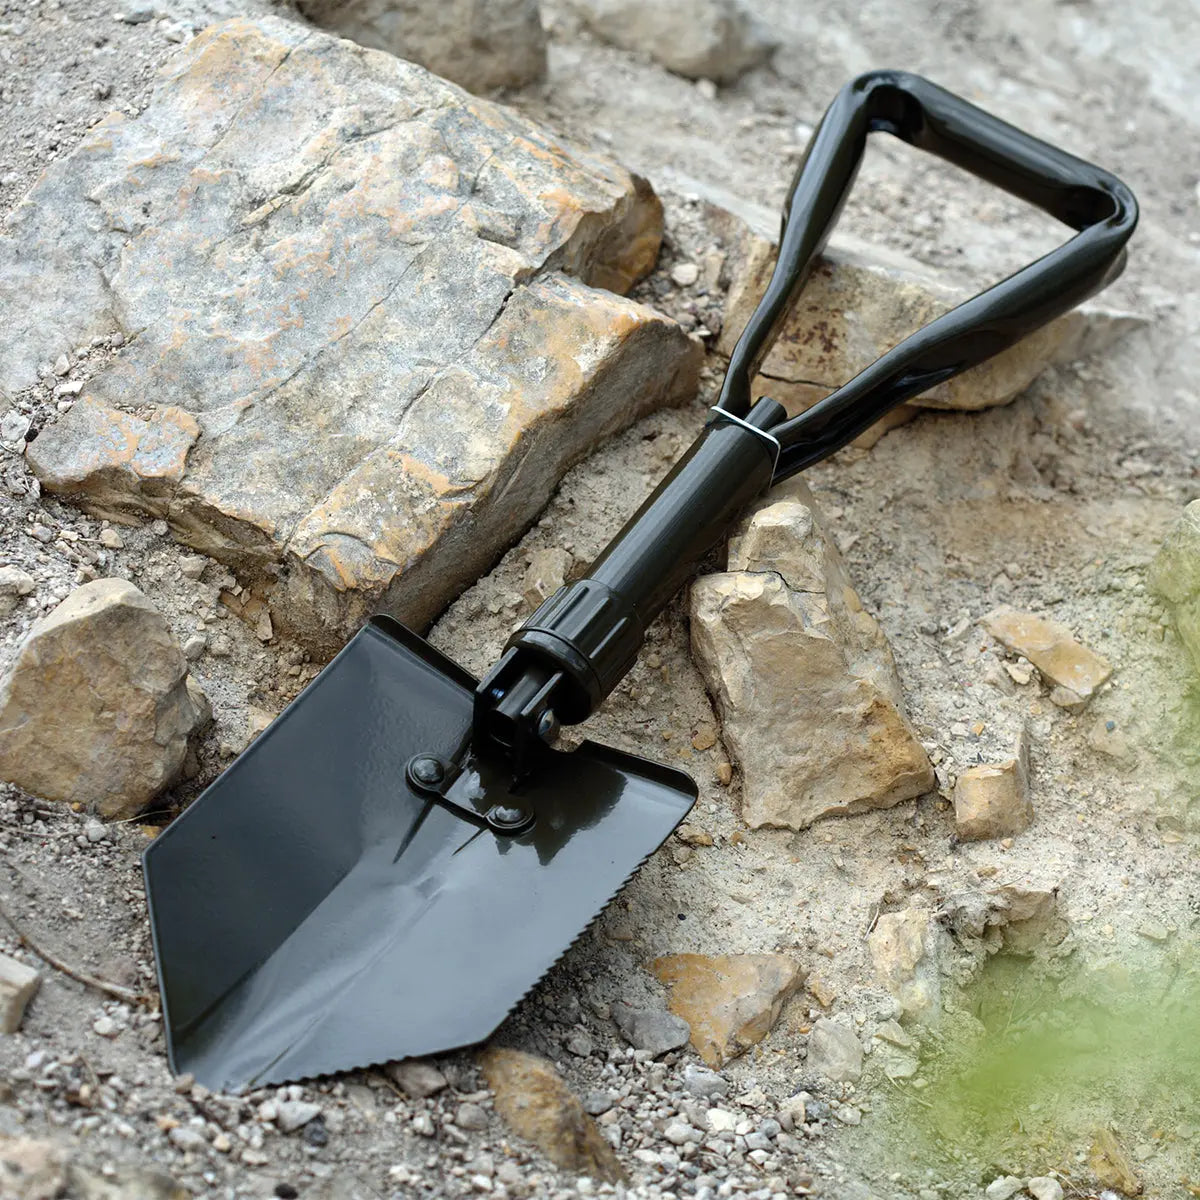 Coghlan's Folding Shovel, Tempered Forged Steel Blade for Digging, Camping Tool Coghlan's